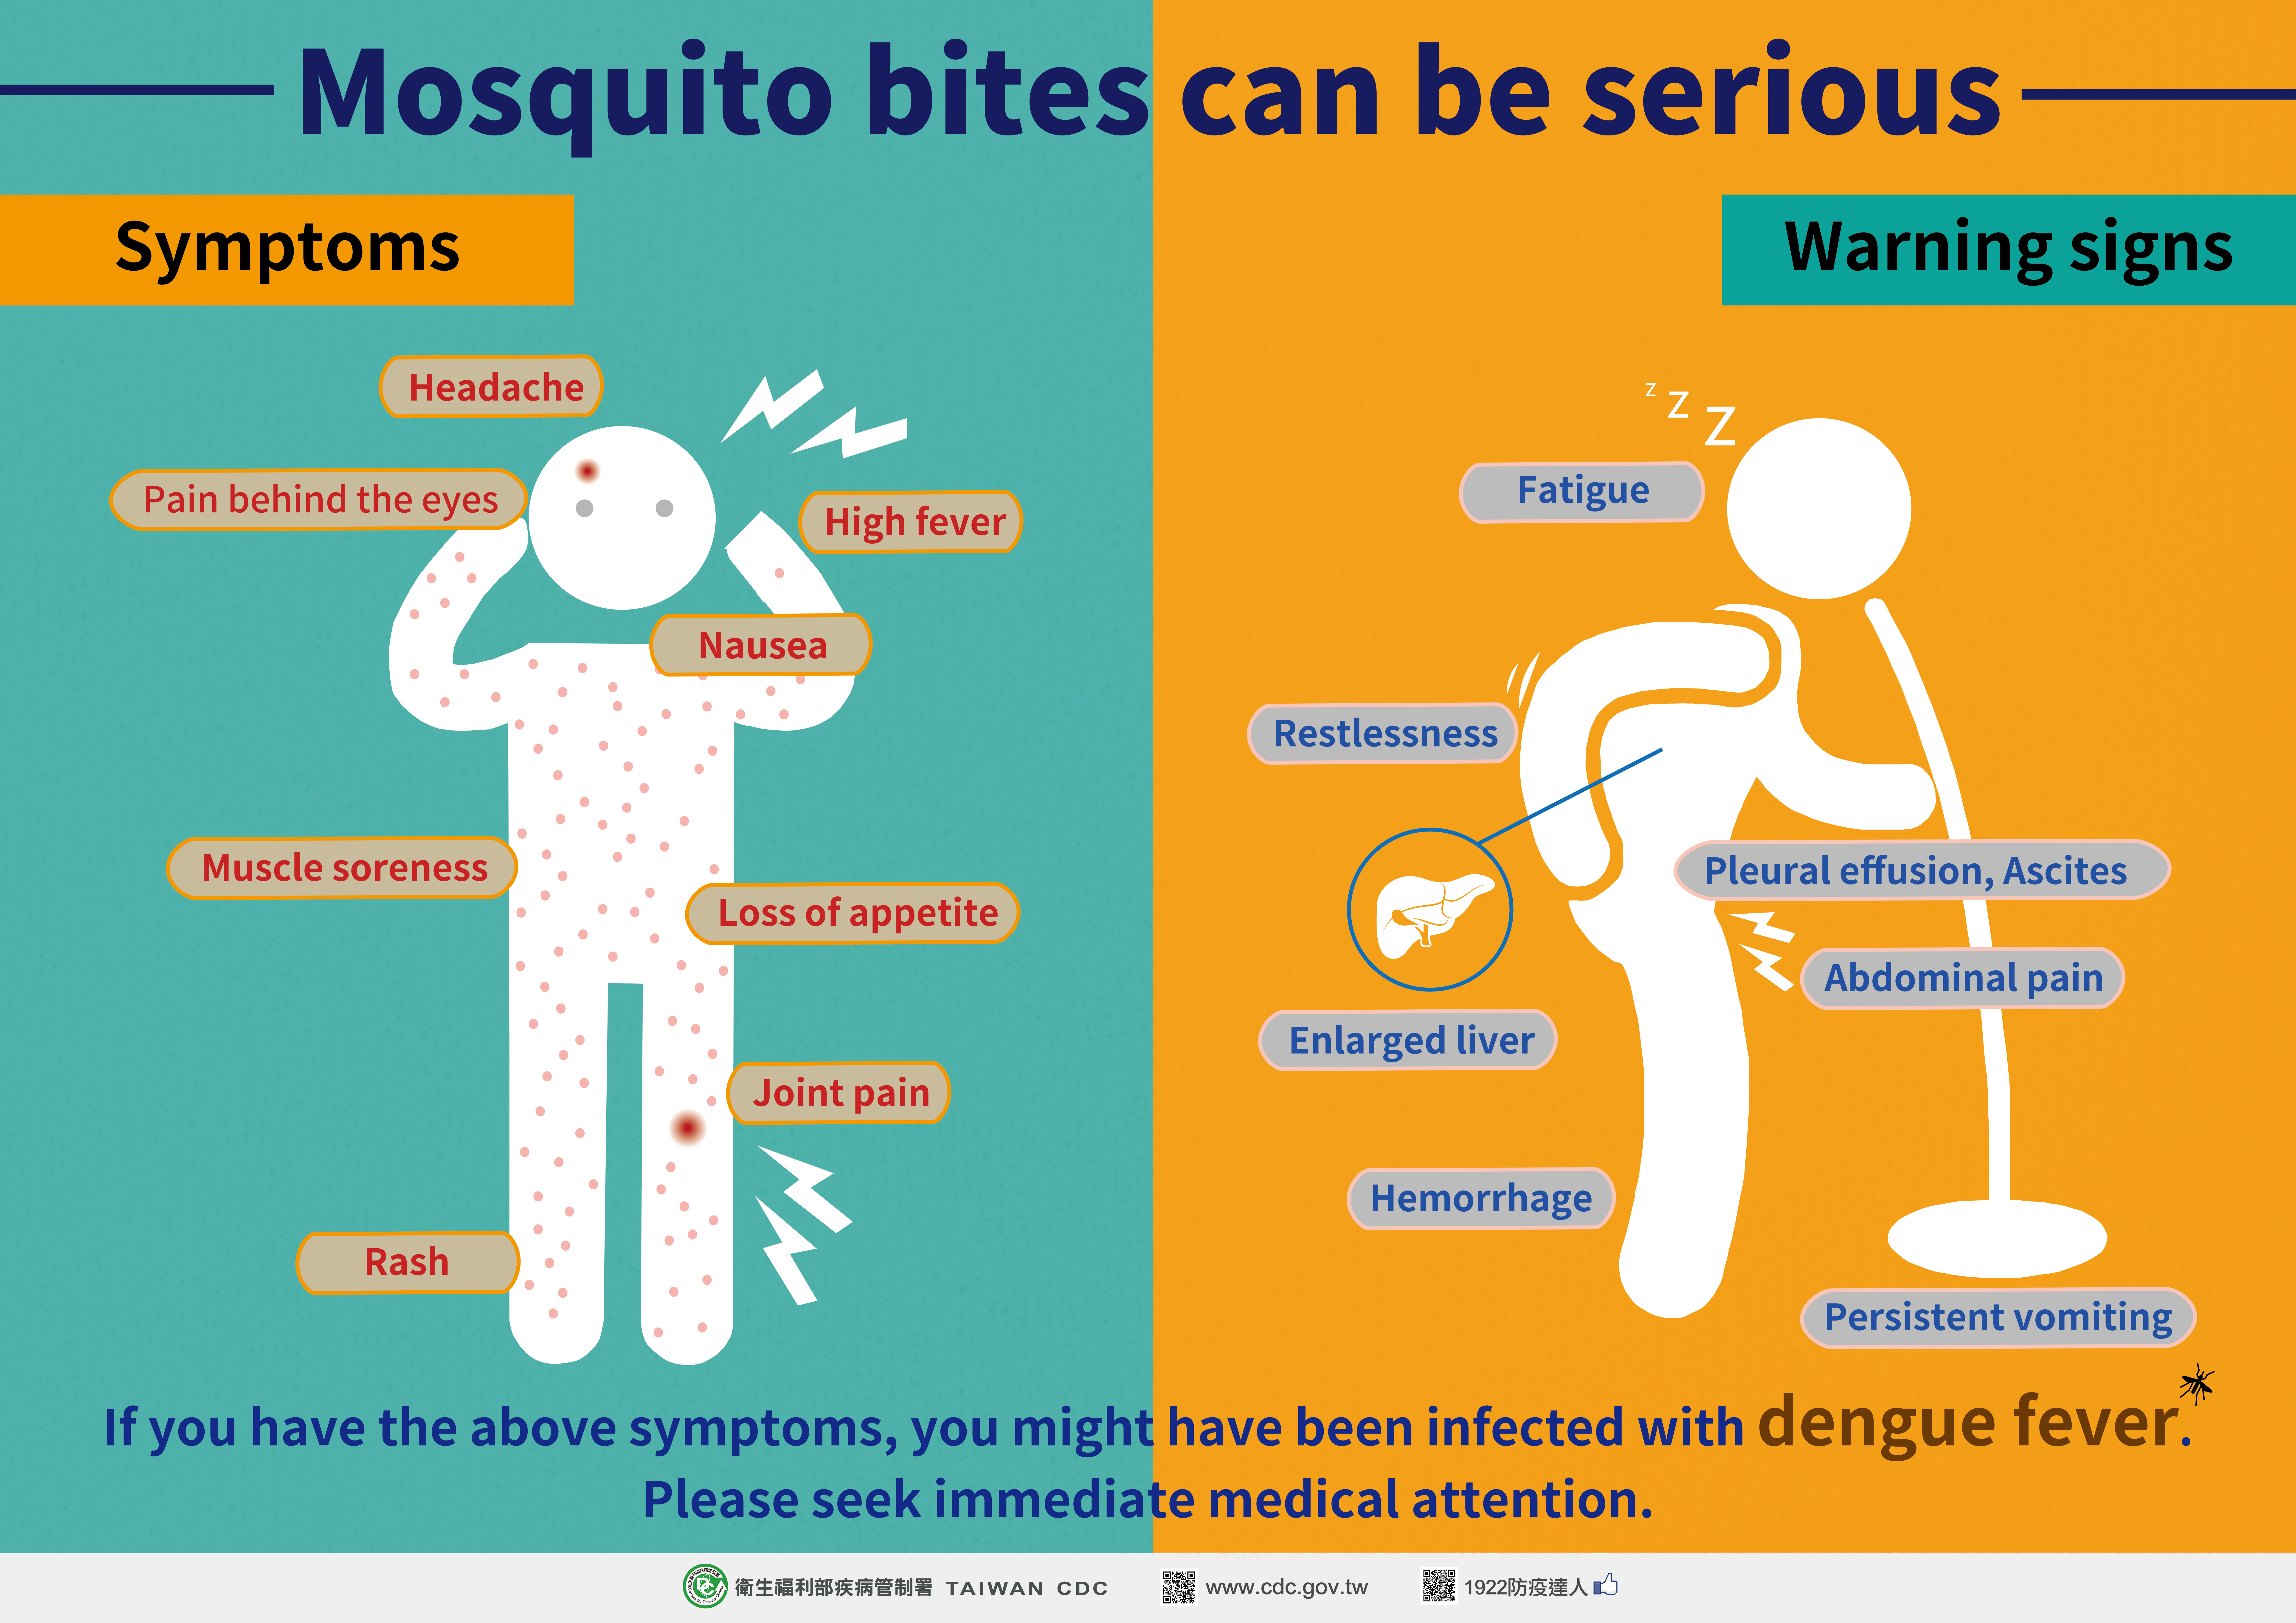 Mosquito bites can be serious